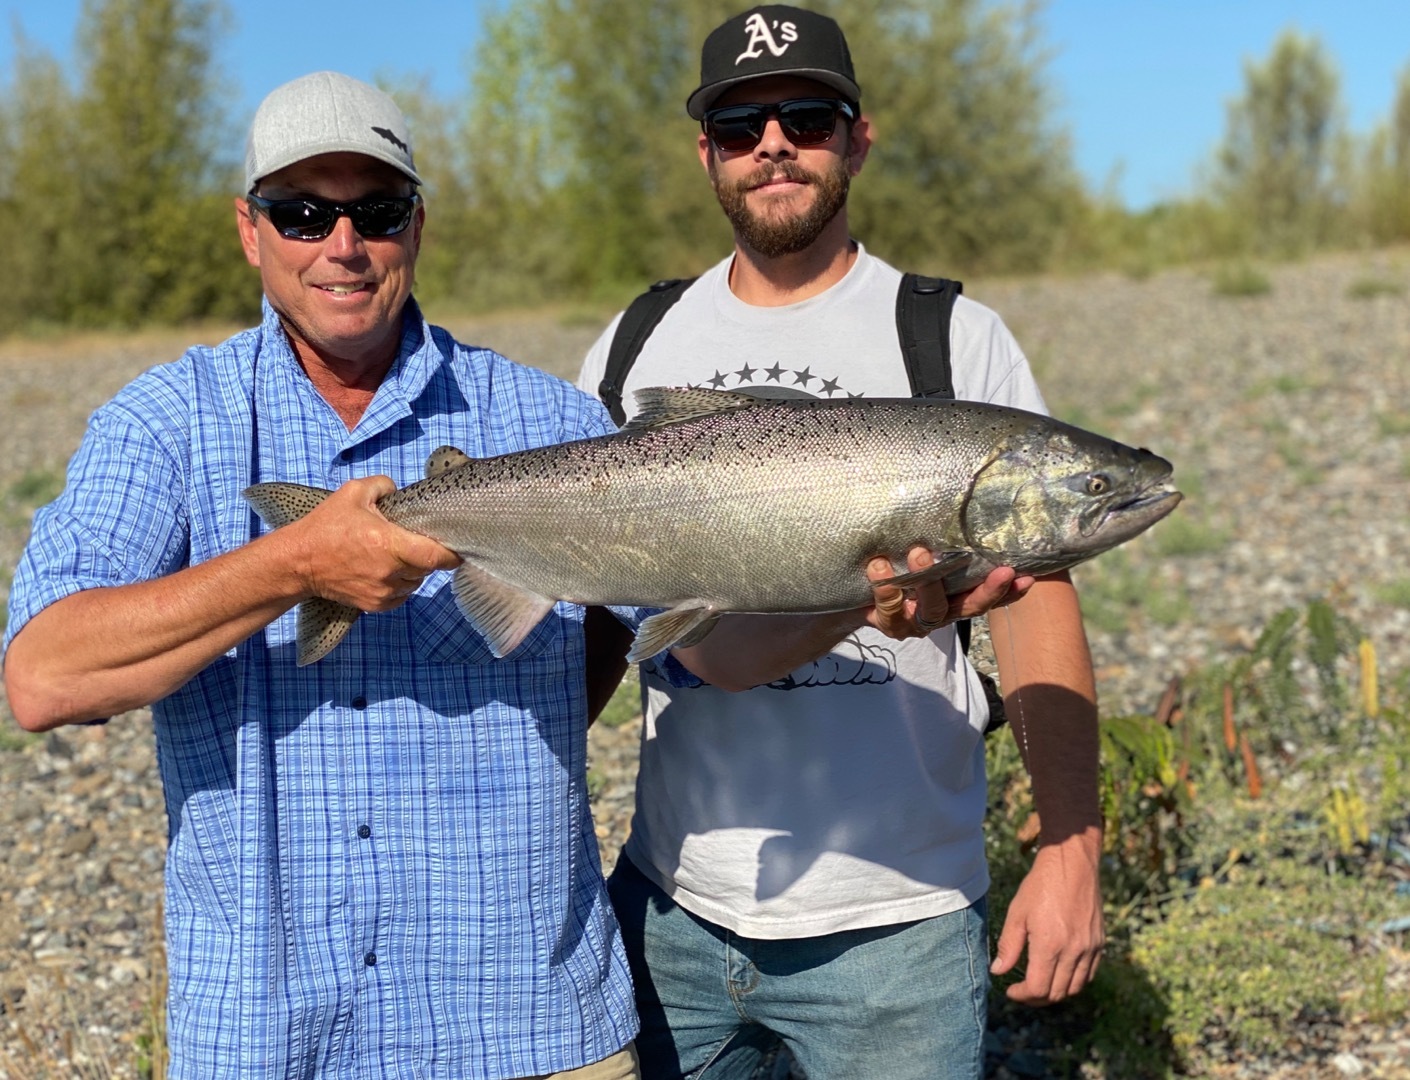 Big salmon showing in the Sacramento River!